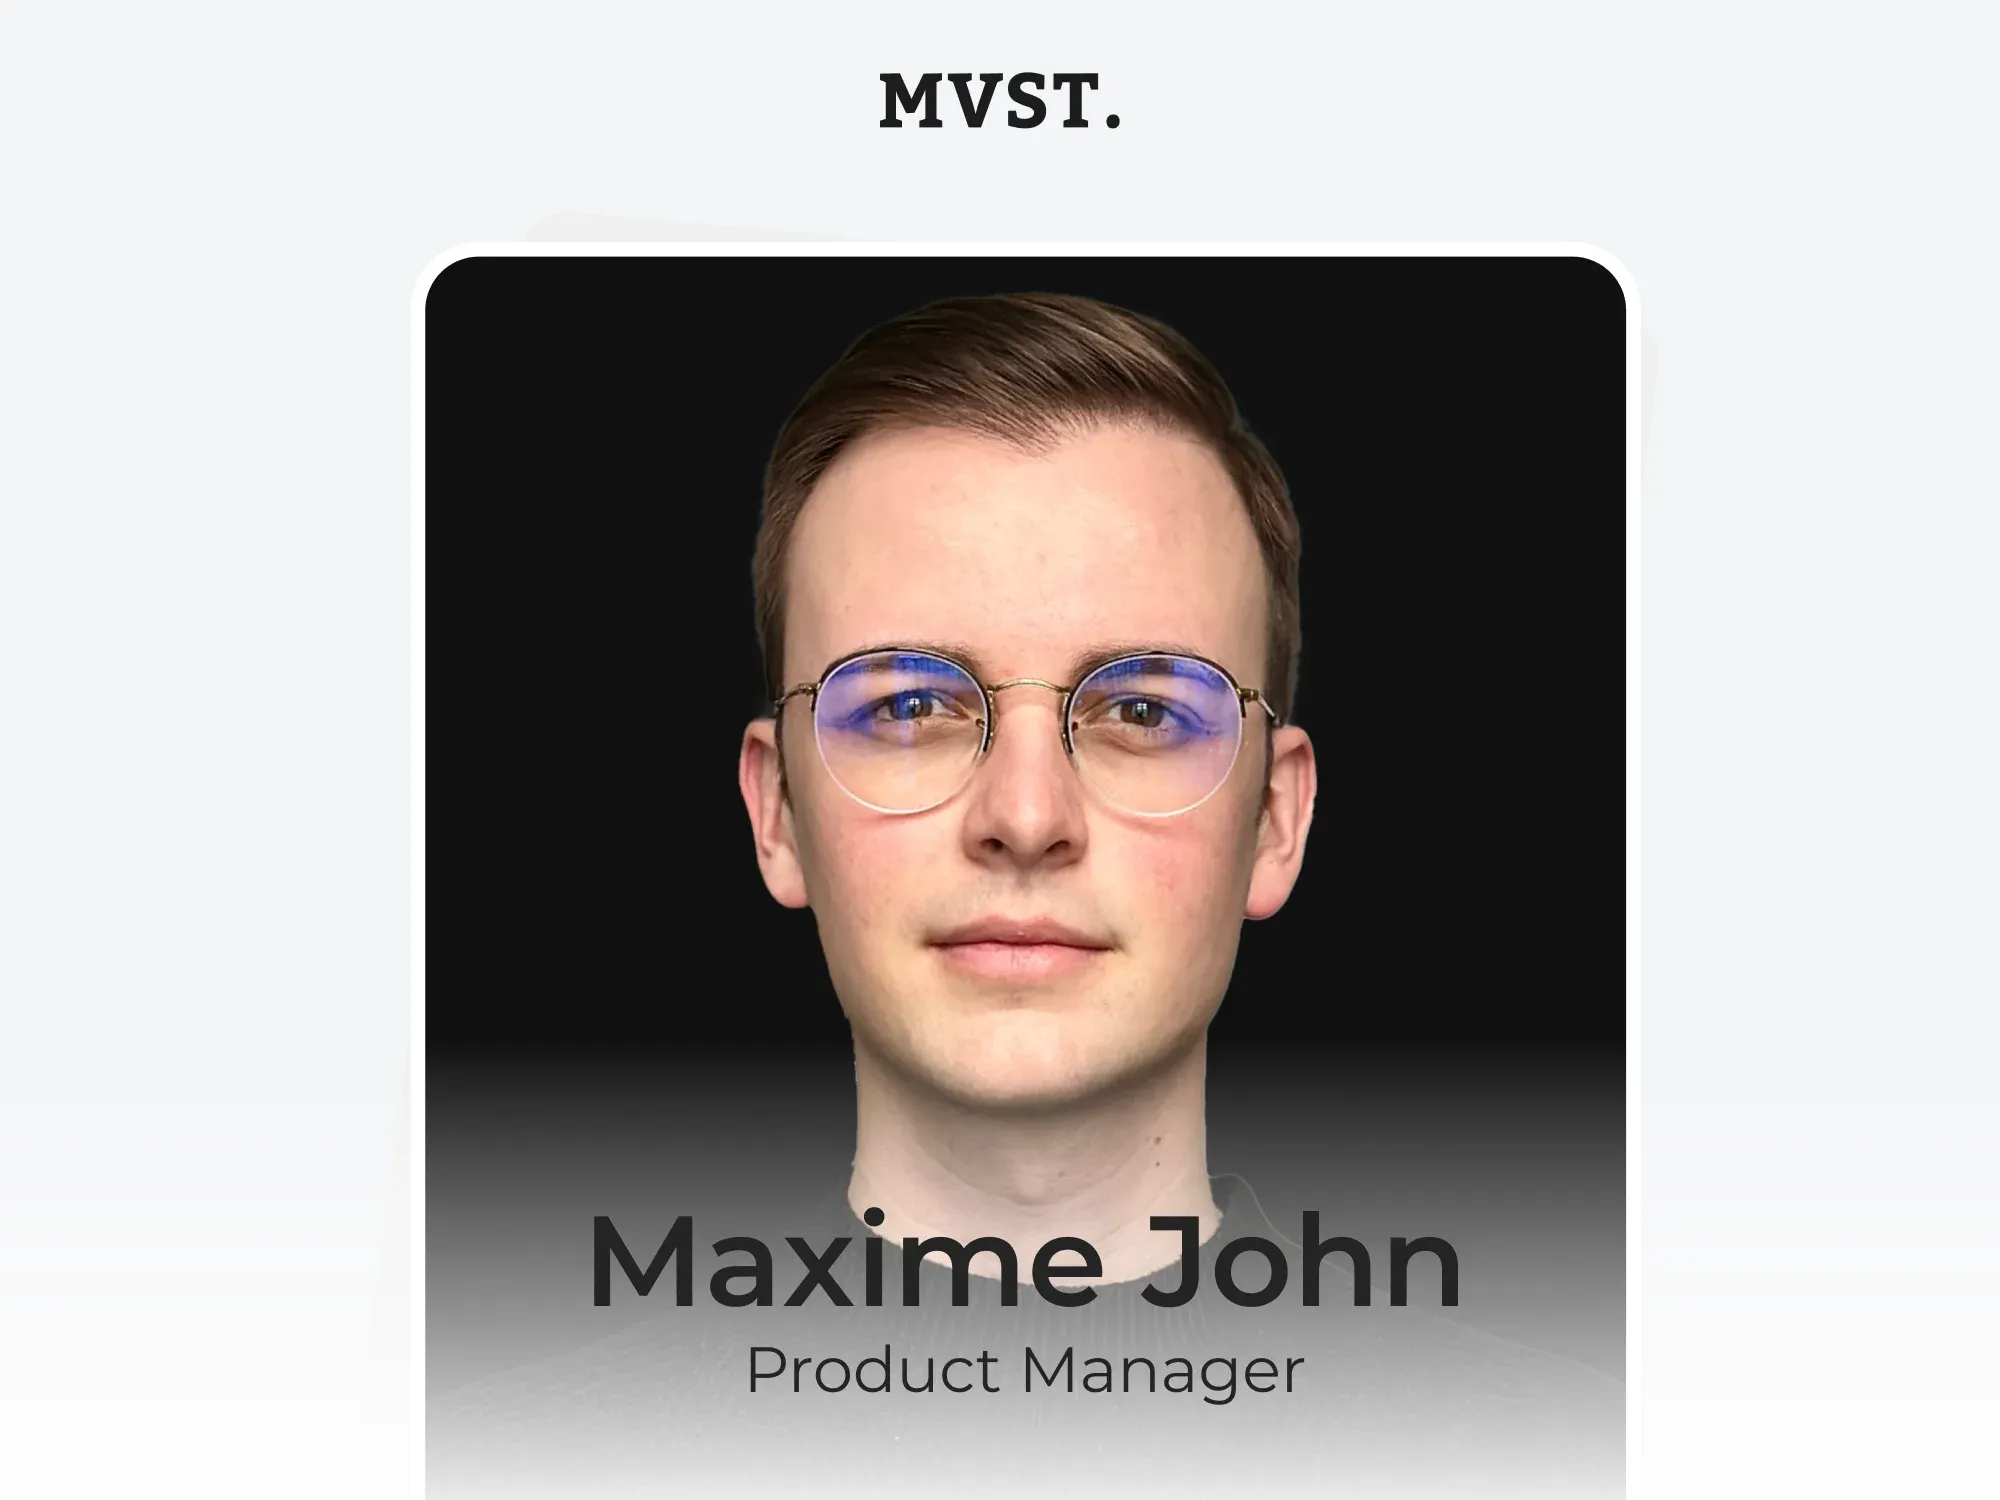 Welcome to MVST, Maxime!